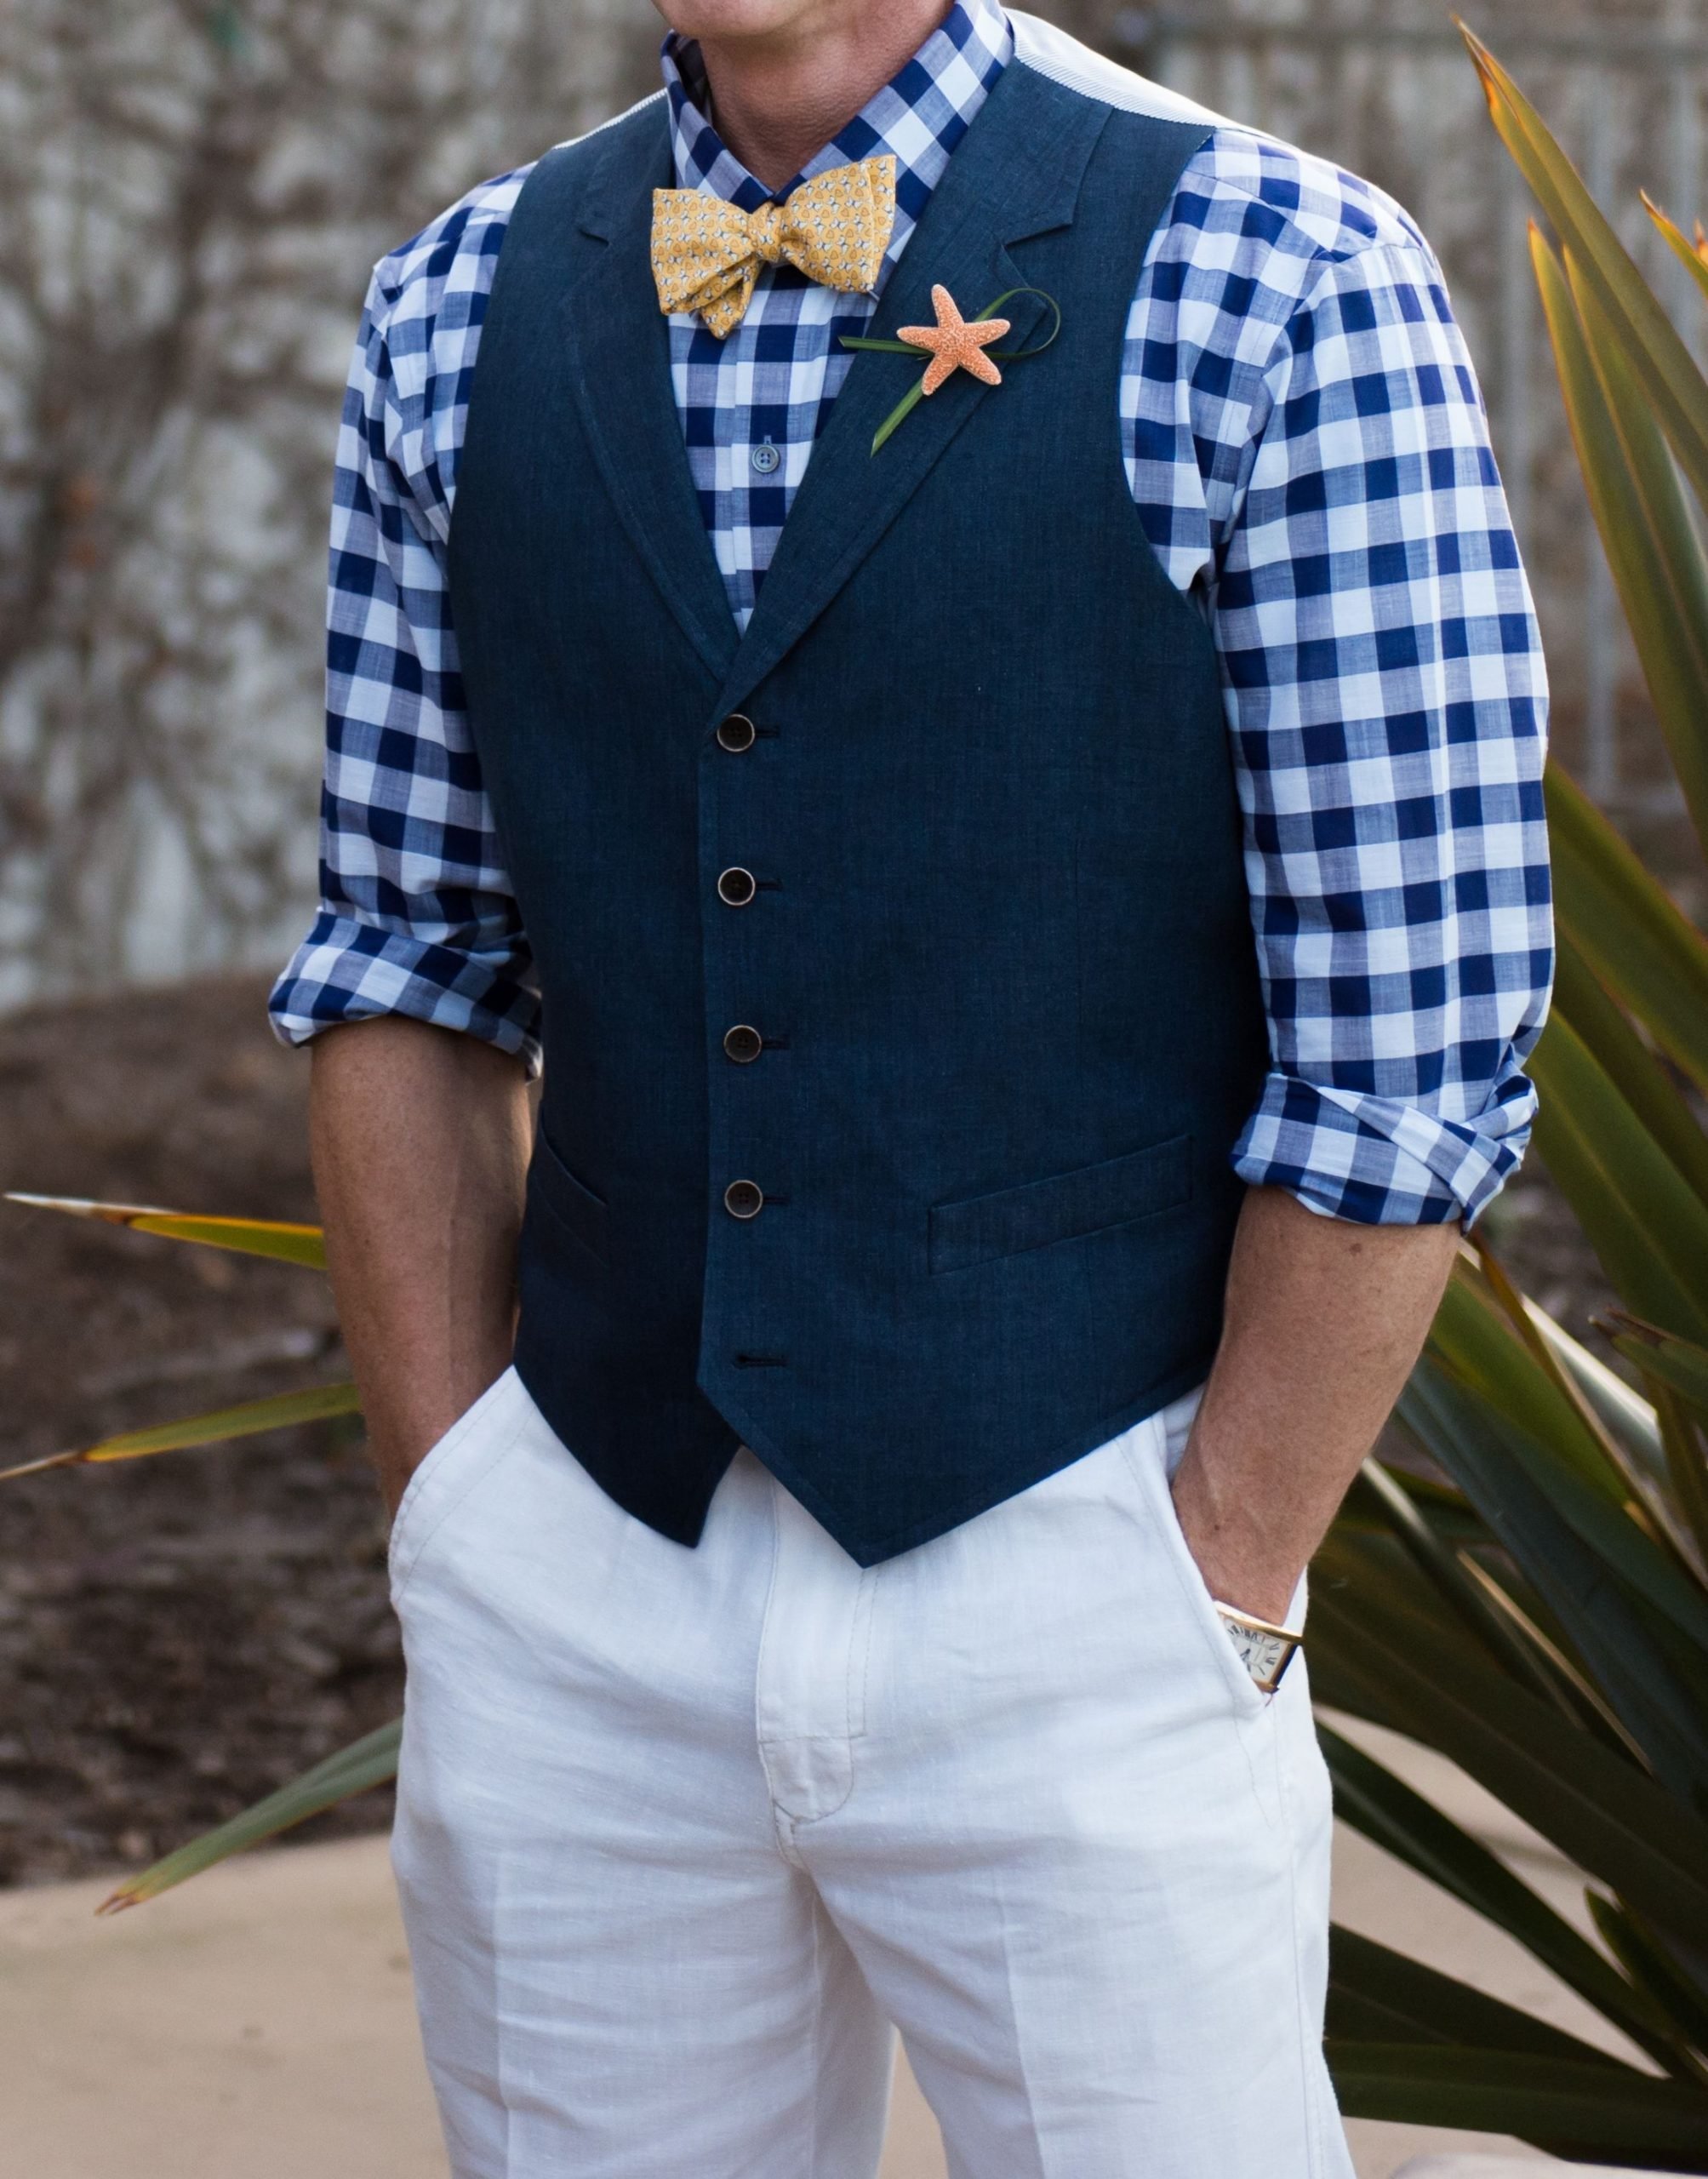 Beachy Gatsby wedding outfit with bowtie, vest, rolled up ...